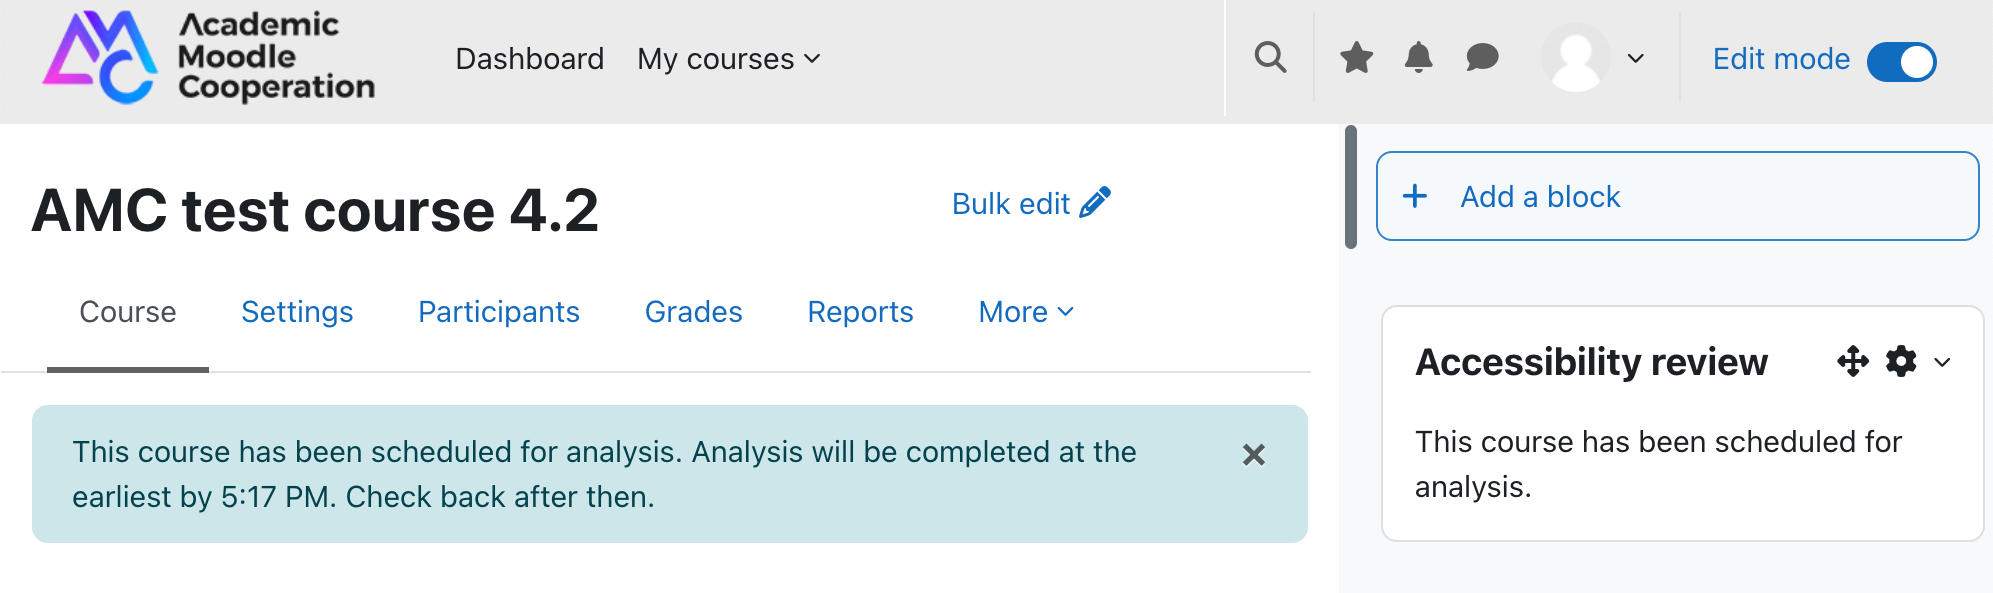 Screenshot of the message that the course has been scheduled for analysis